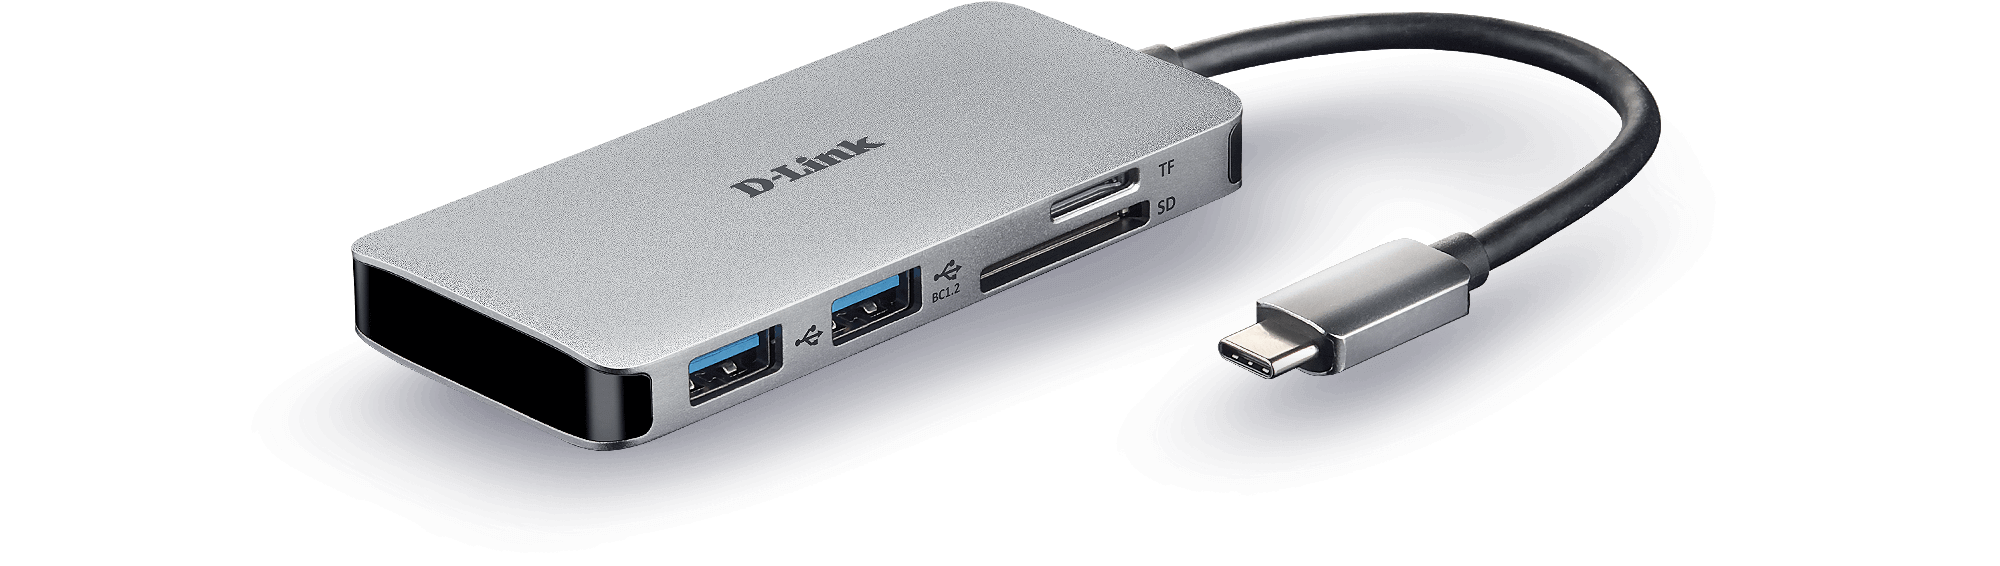 DUB-M610 6-in-1 USB-C Hub with HDMI/Card Reader/Power Delivery - front